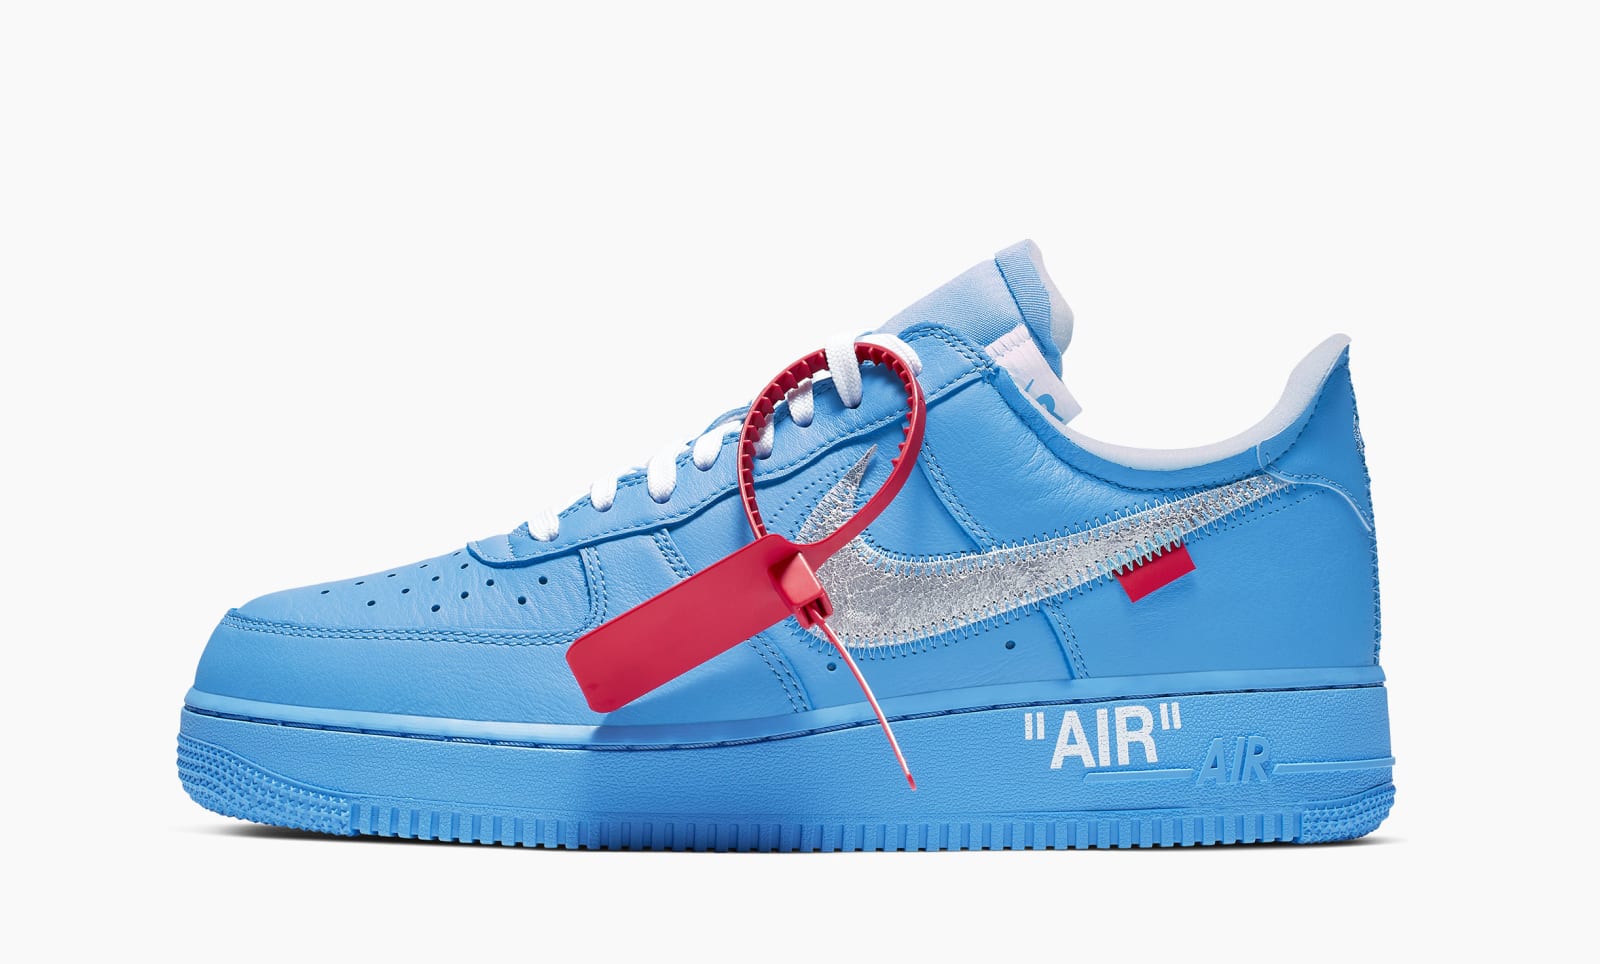 Off-White X Nike Air Force 1 &quot;MCA&quot; To Release In Coming Weeks: Report